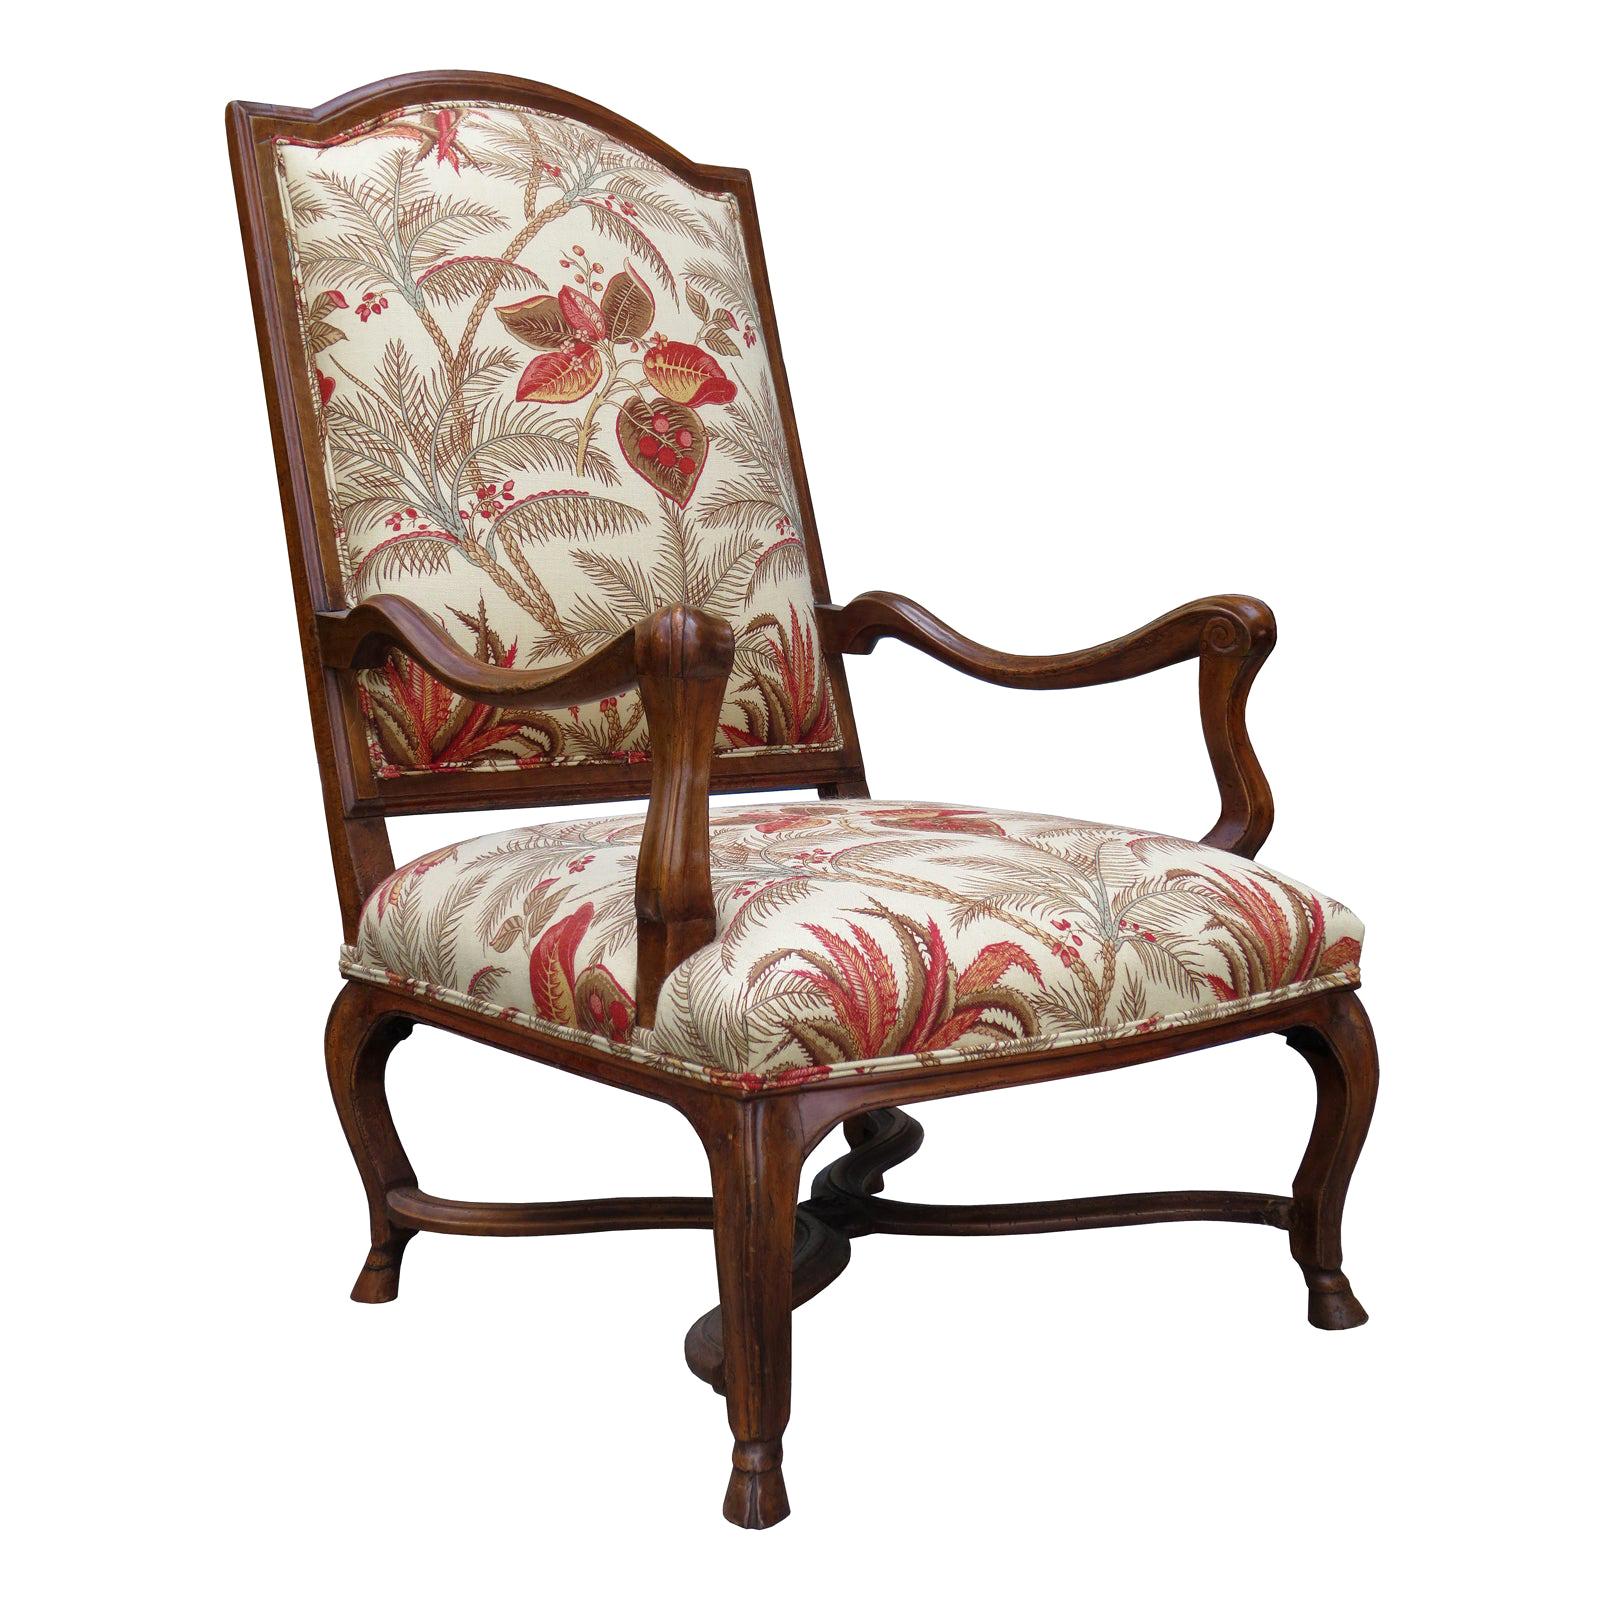 18th-19th Century French Provincial Walnut Regence Armchair with Stretcher